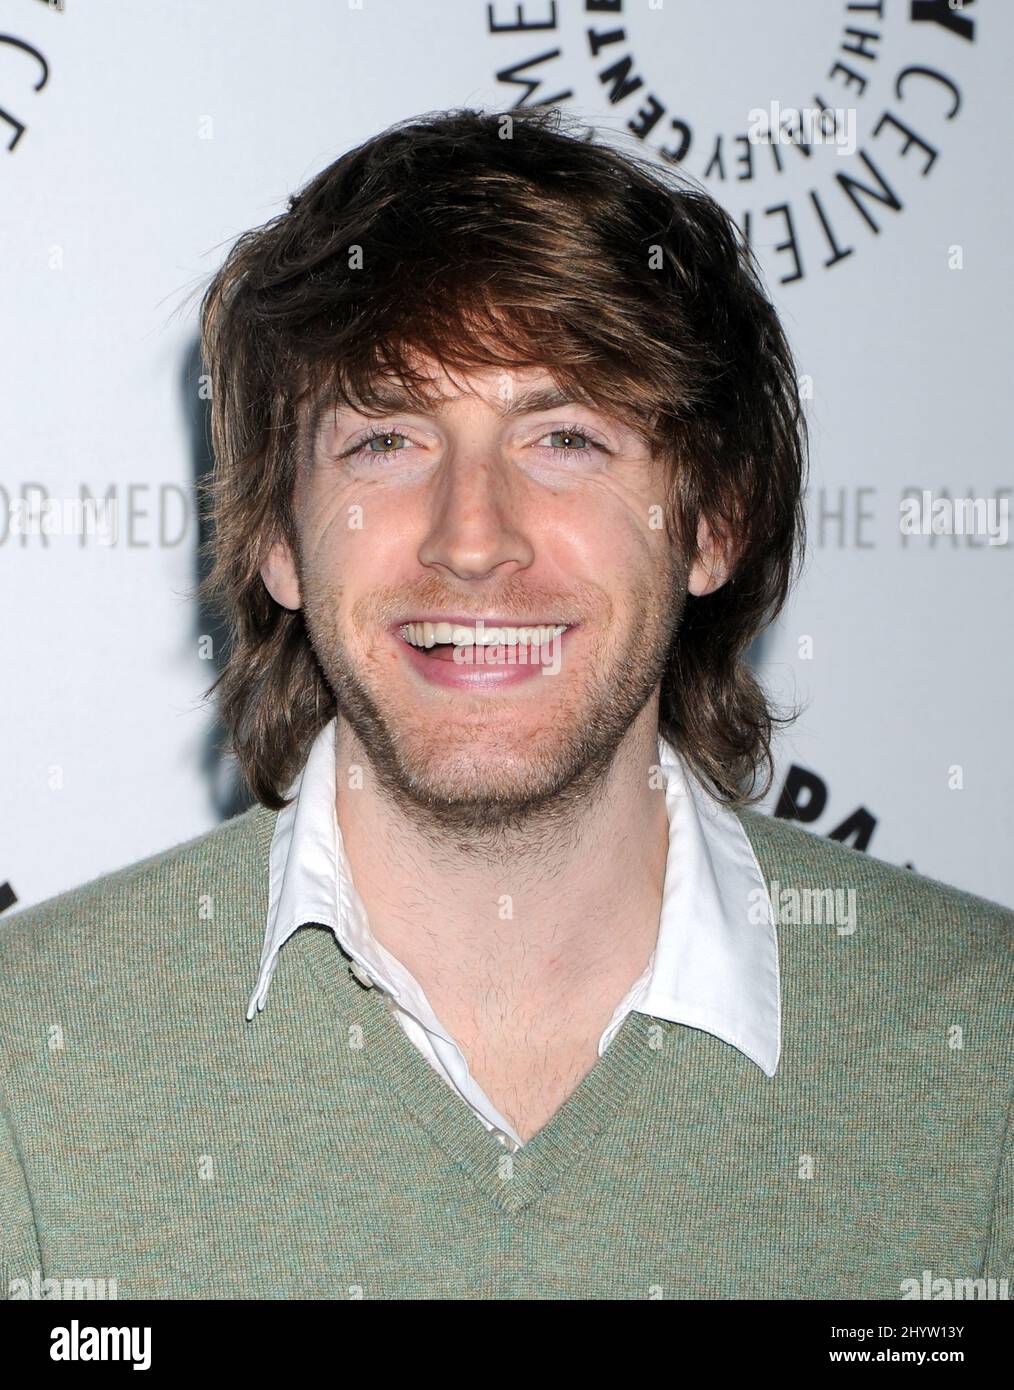 Fran Kranz arrives for 'Dollhouse' at the 26th Annual William S. Paley Television Festival held at the ArcLight Cinemas in Hollywood California, USA. Stock Photo